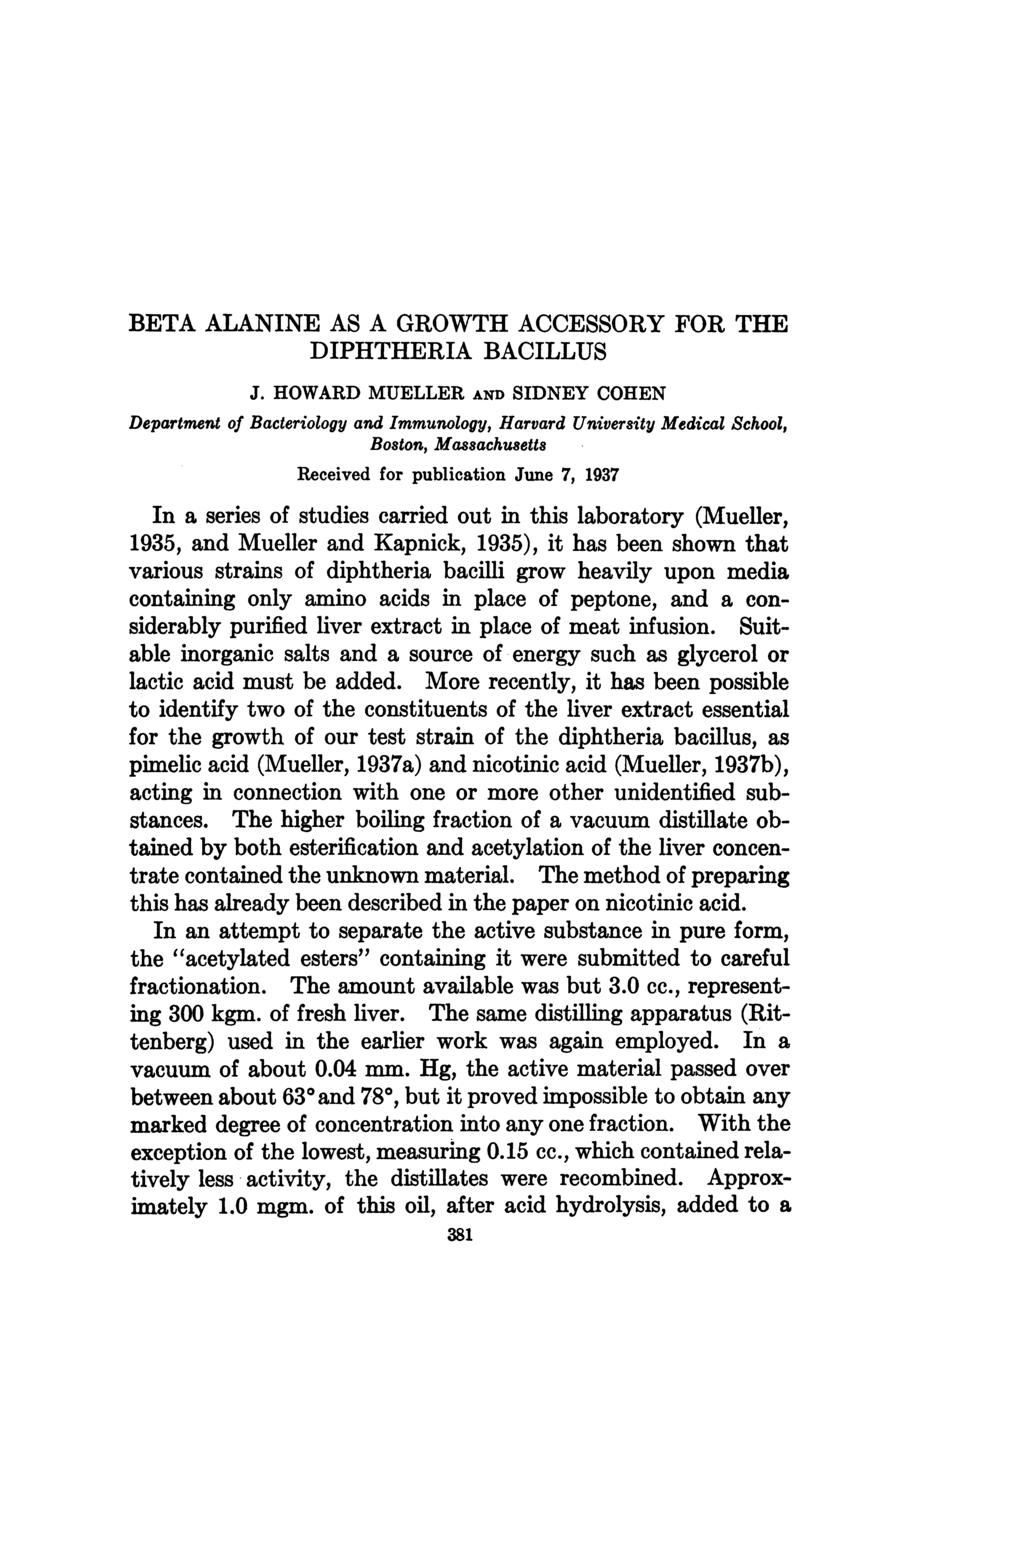 BETA ALANINE AS A GROWTH ACCESSORY FOR THE DIPHTHERIA BACILLUS J.